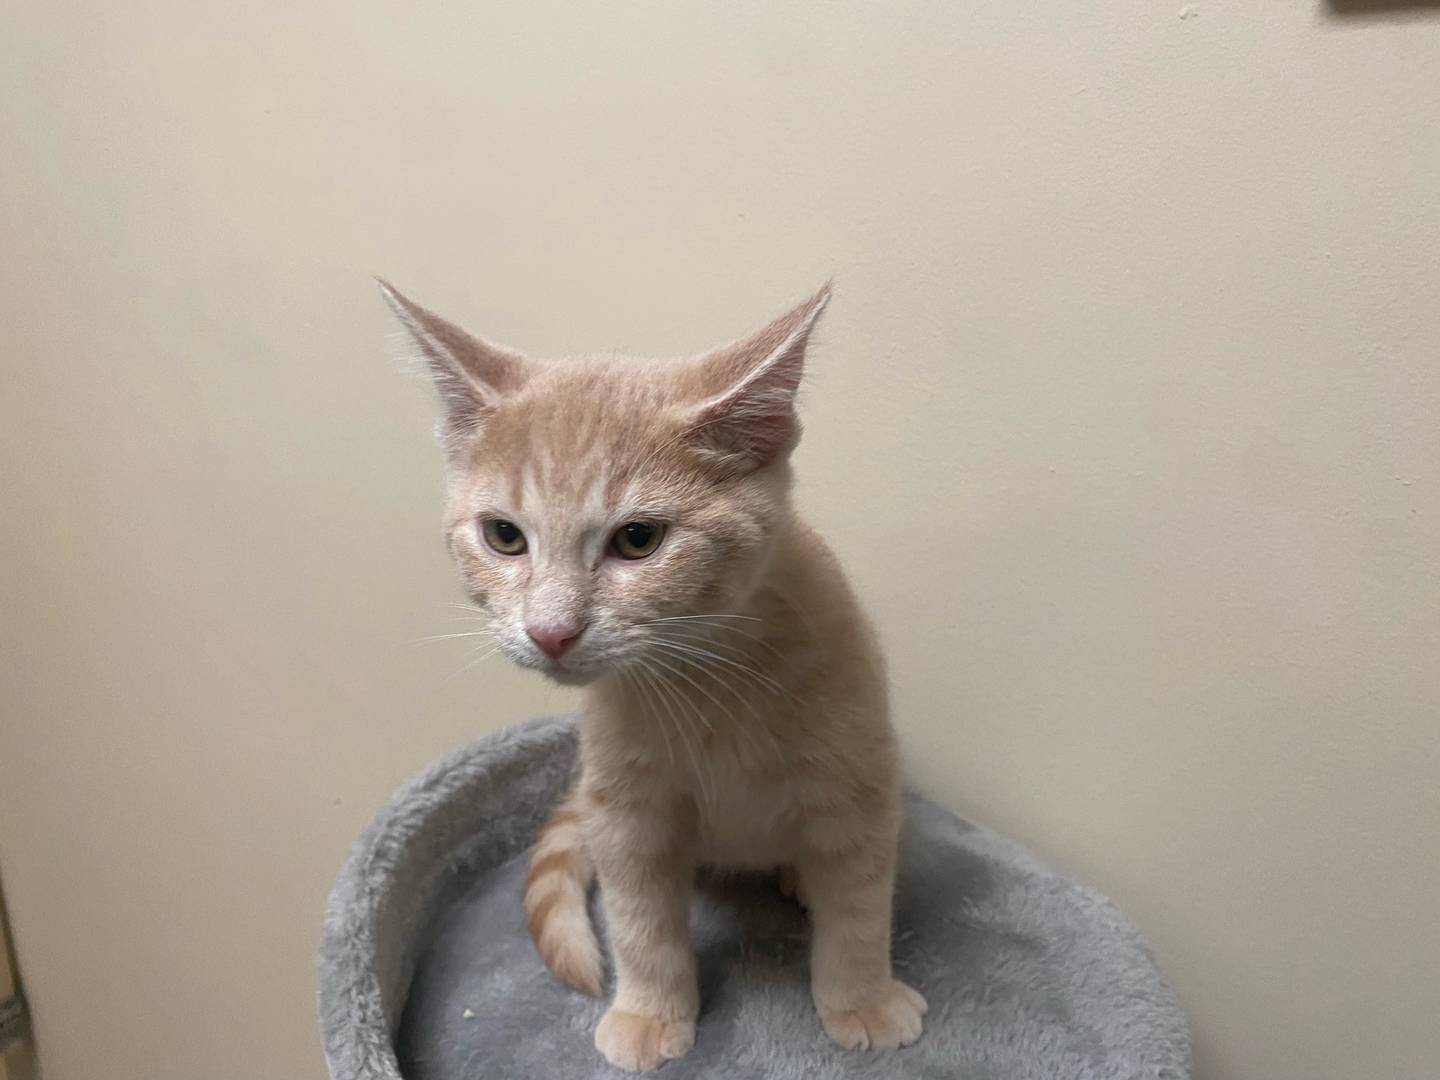 Tag is a 10-week-old domestic shorthair. He is very energetic and loves to play. Tag is very curious and affectionate. For more information on Tag, including adoption fees please visit justanimals.org or call 815-448-2510.